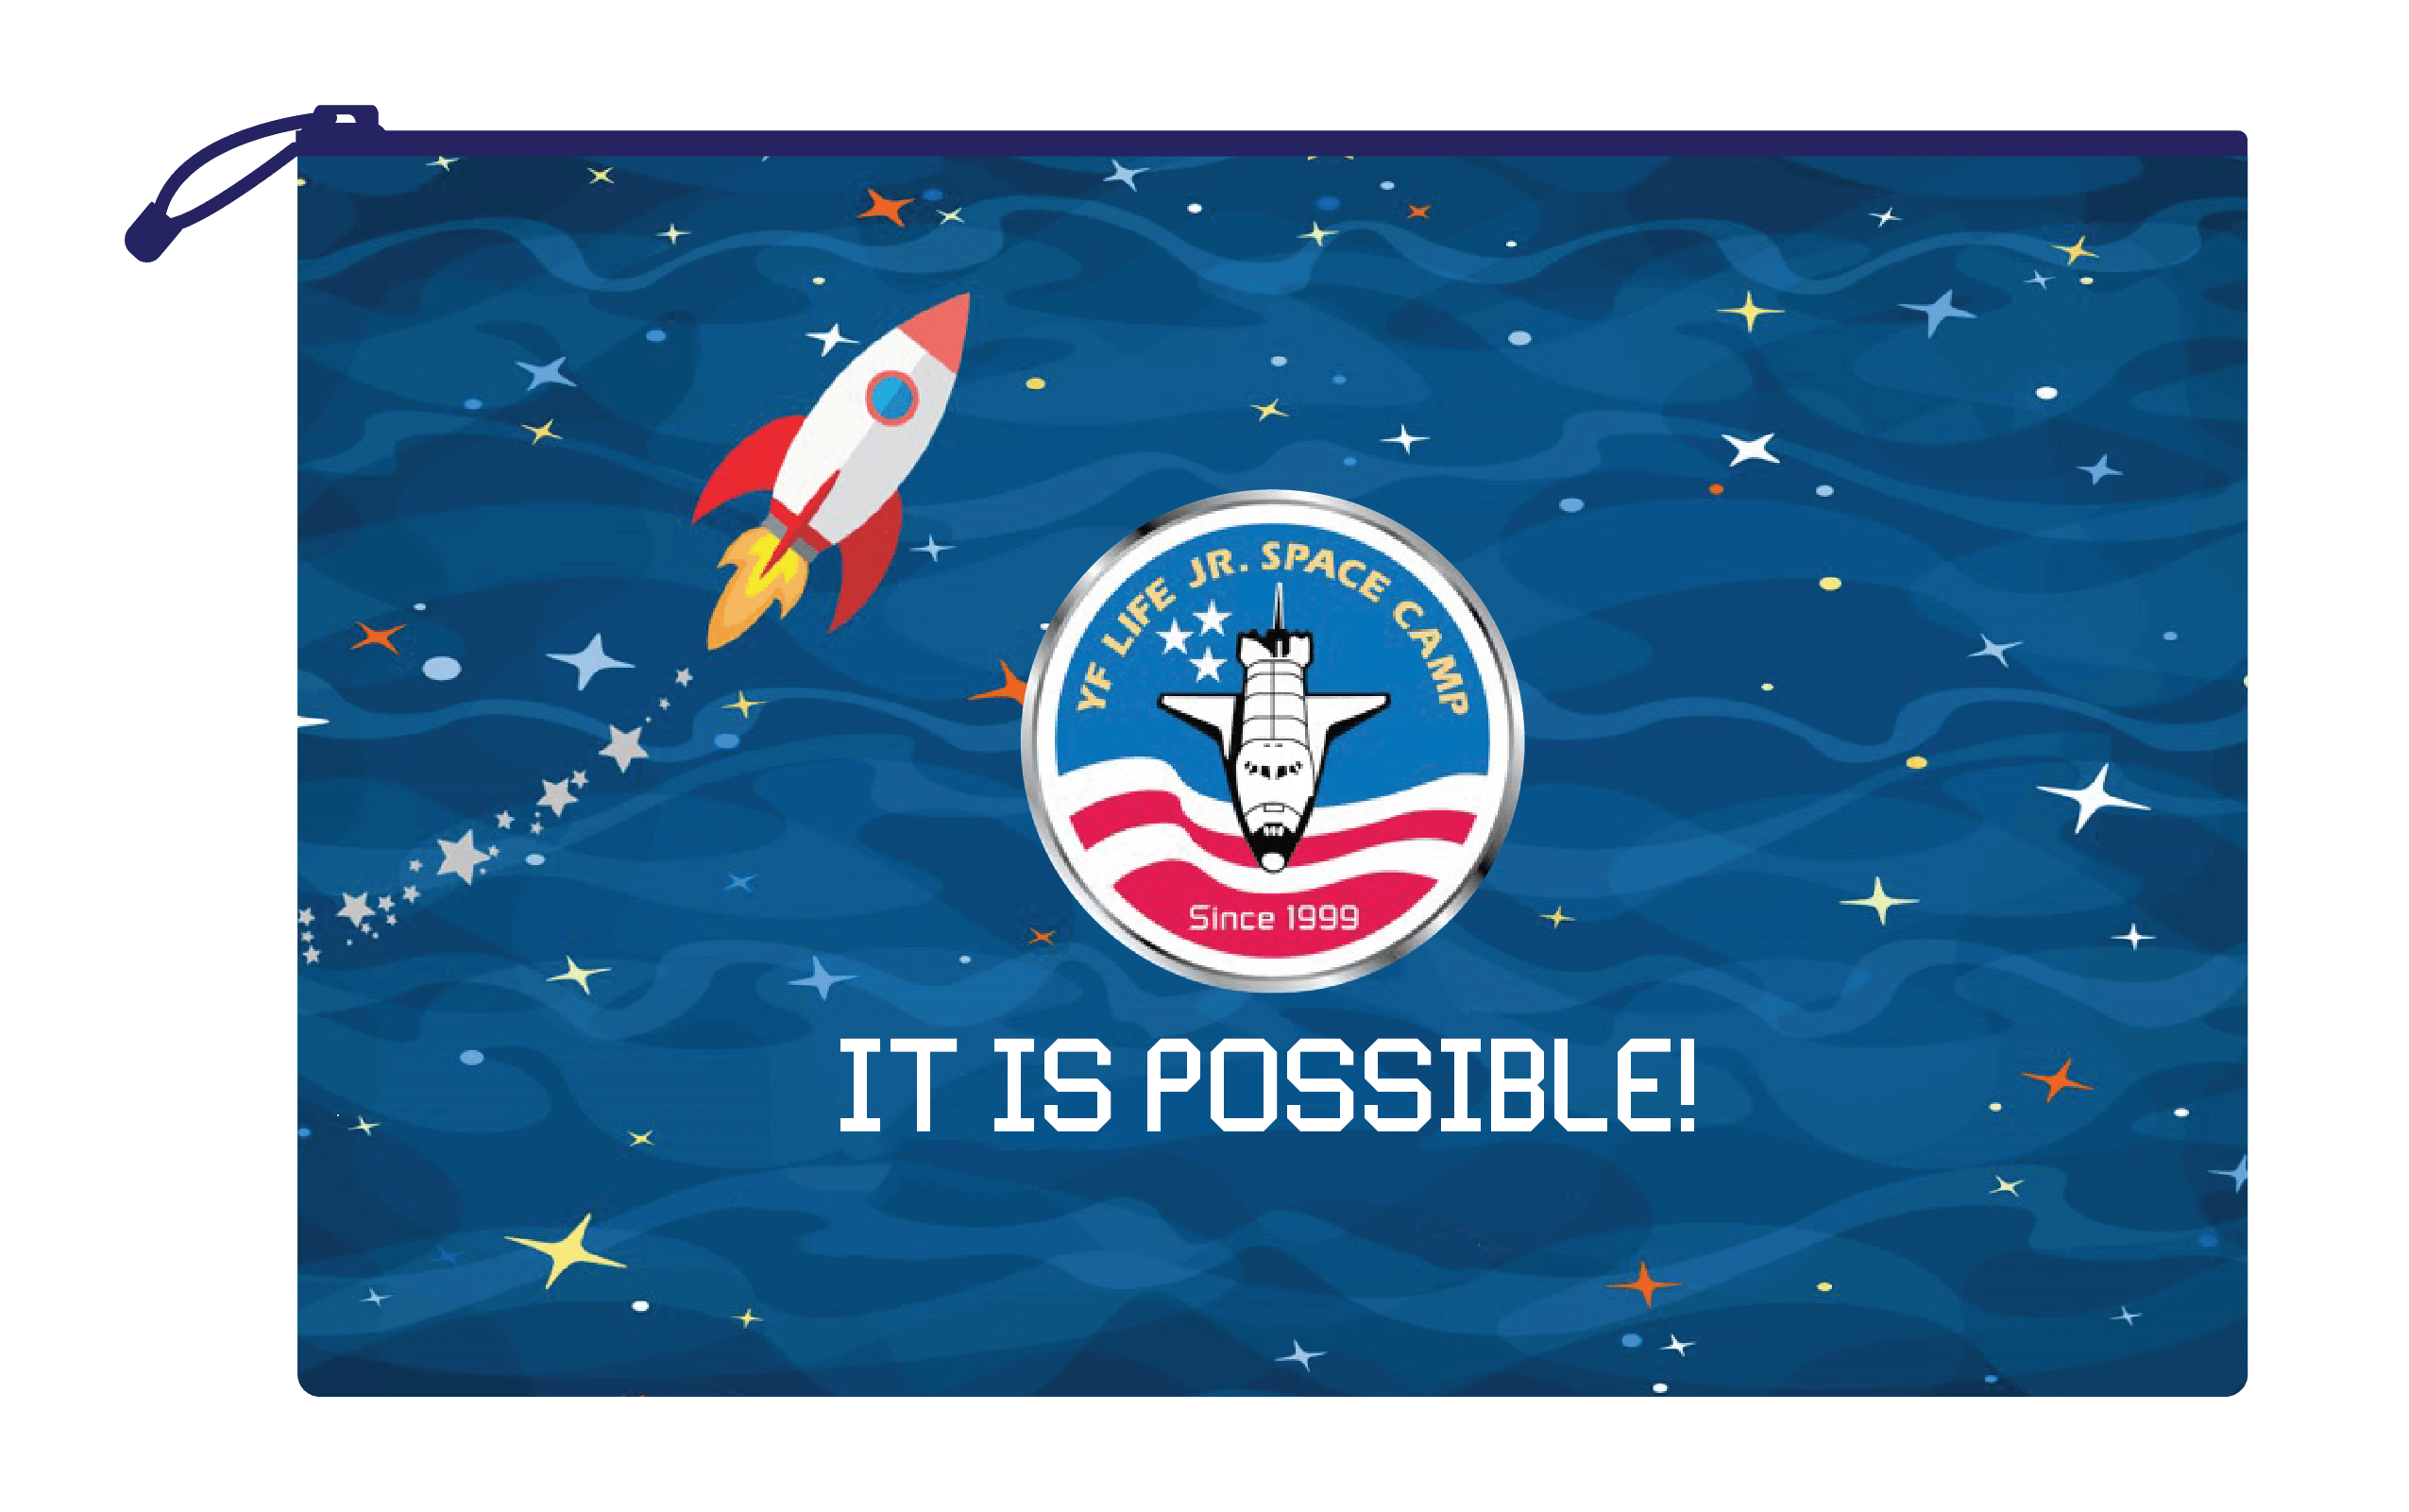 Those making successful applications via www.itispossible.com.hk on or before March 31 will receive a limited-edition space gift. 